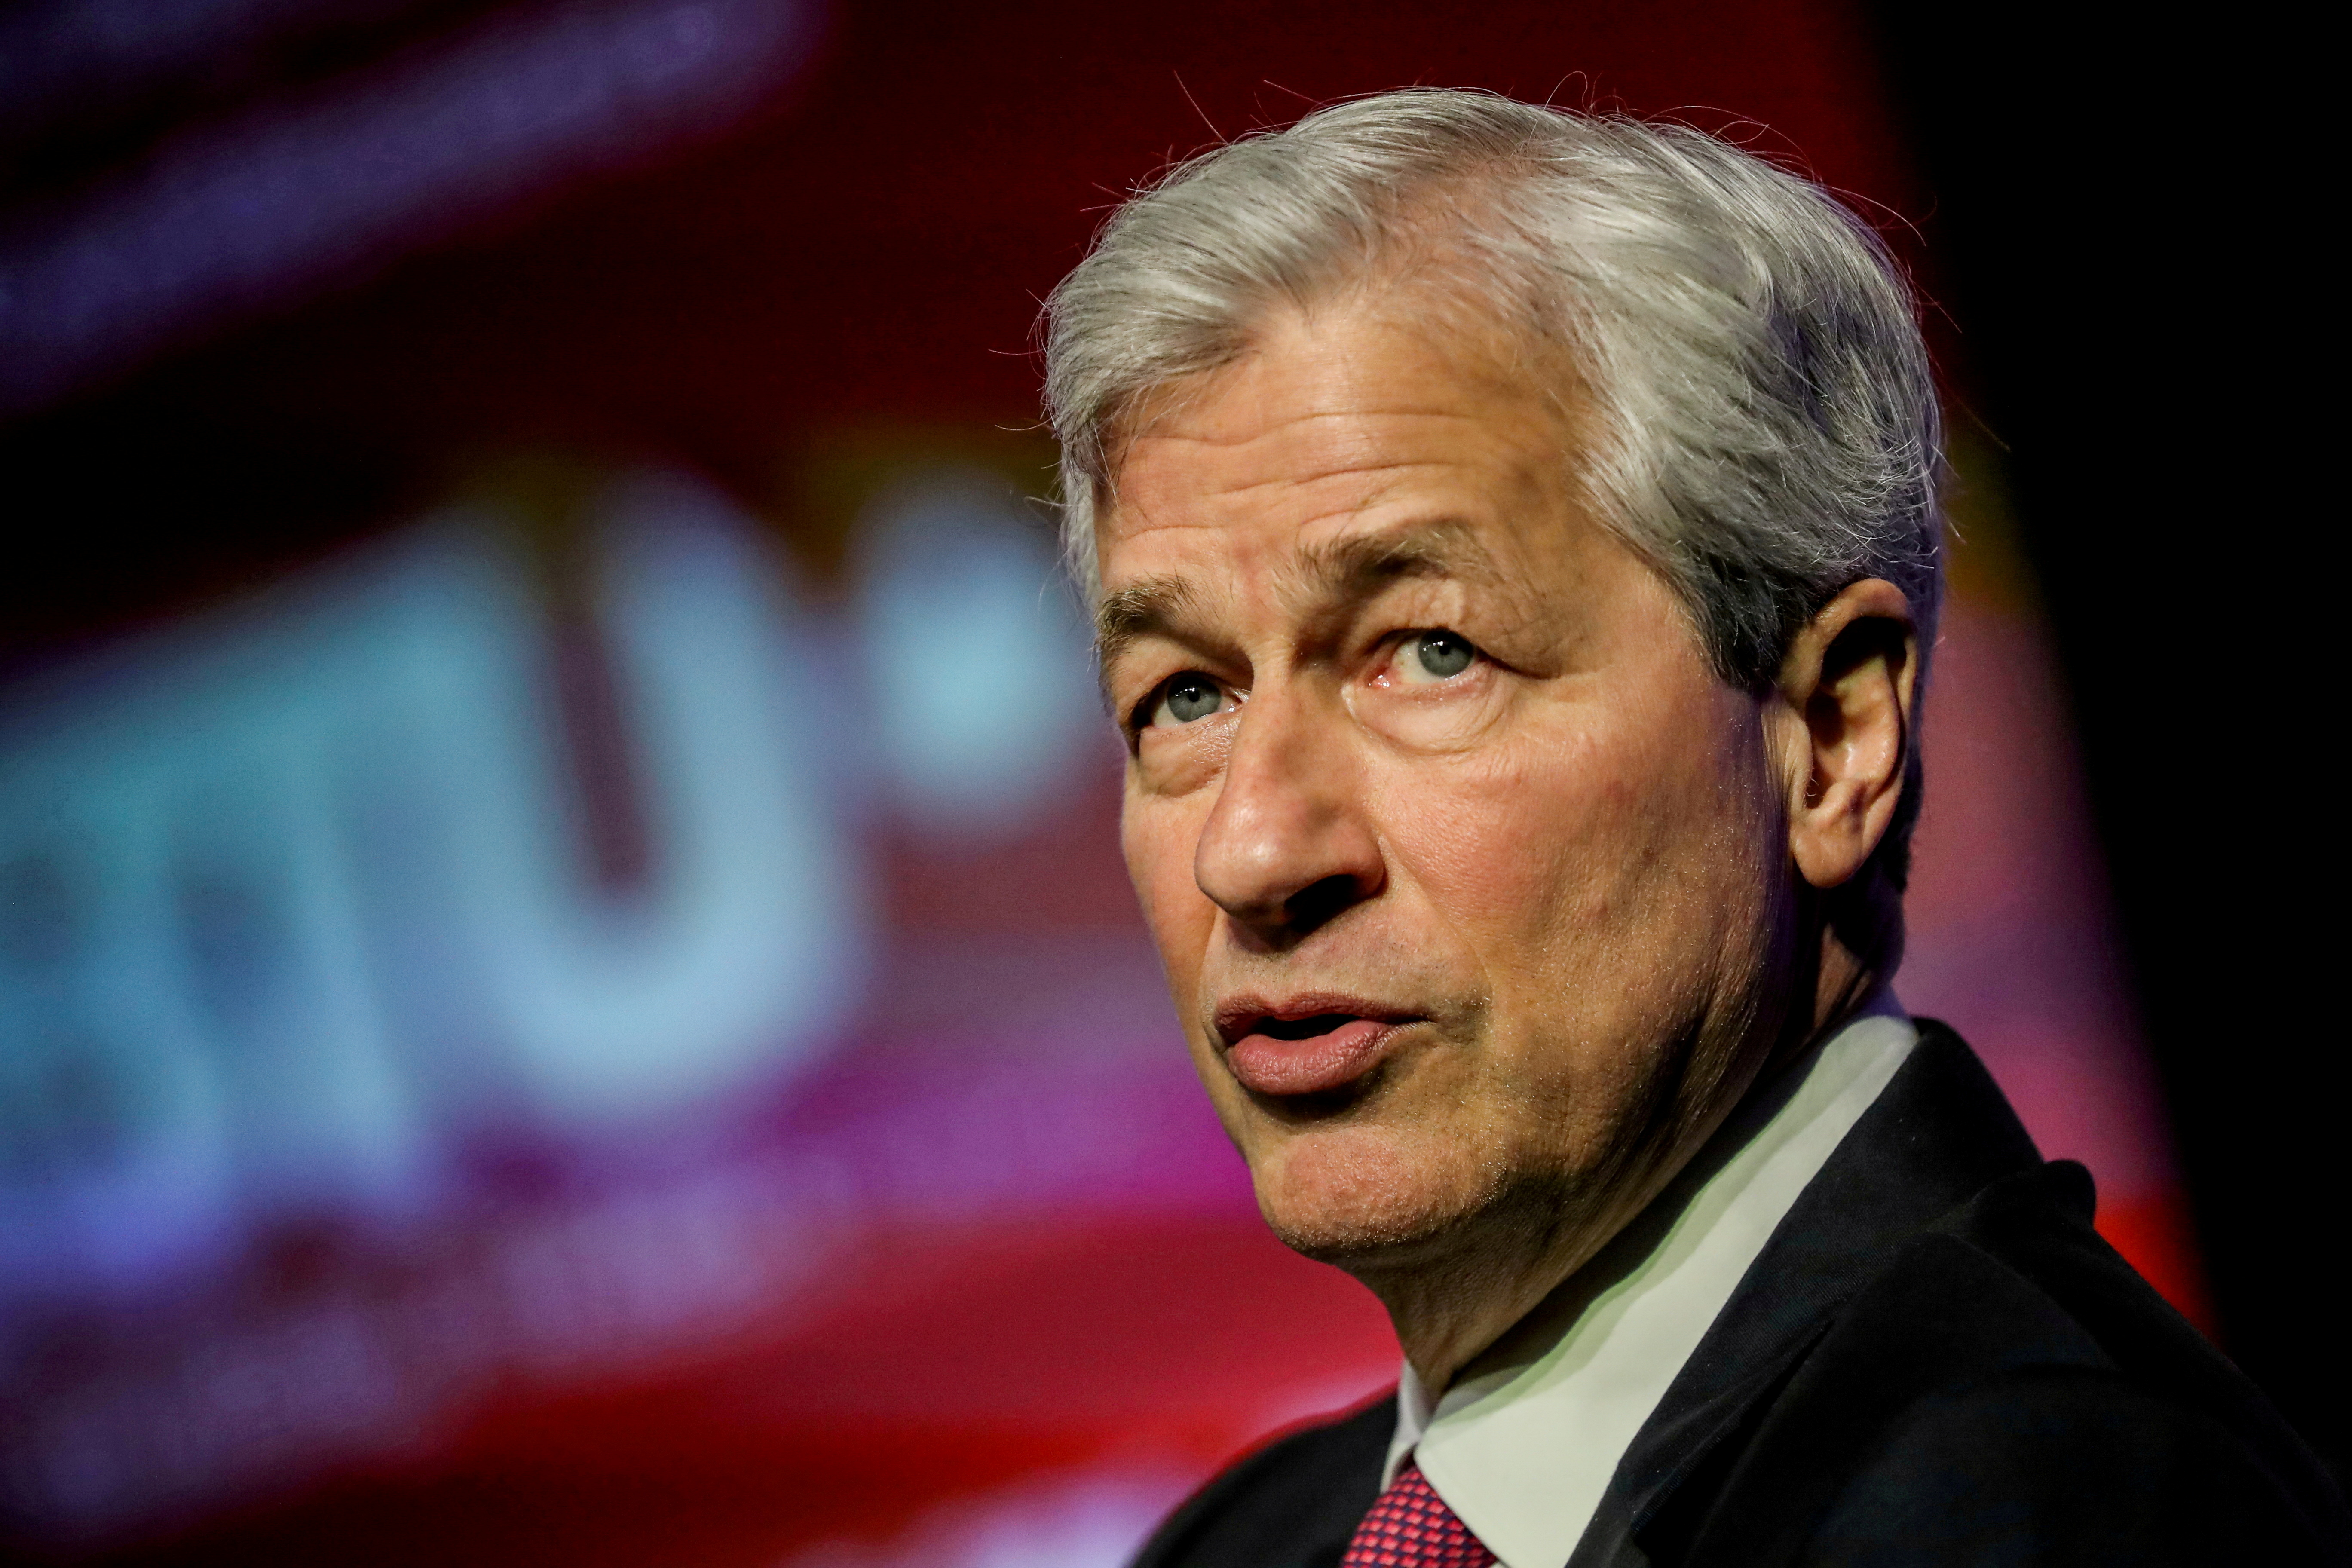 JPMorgan Chase CEO Jamie Dimon speaks at a conference in Washington